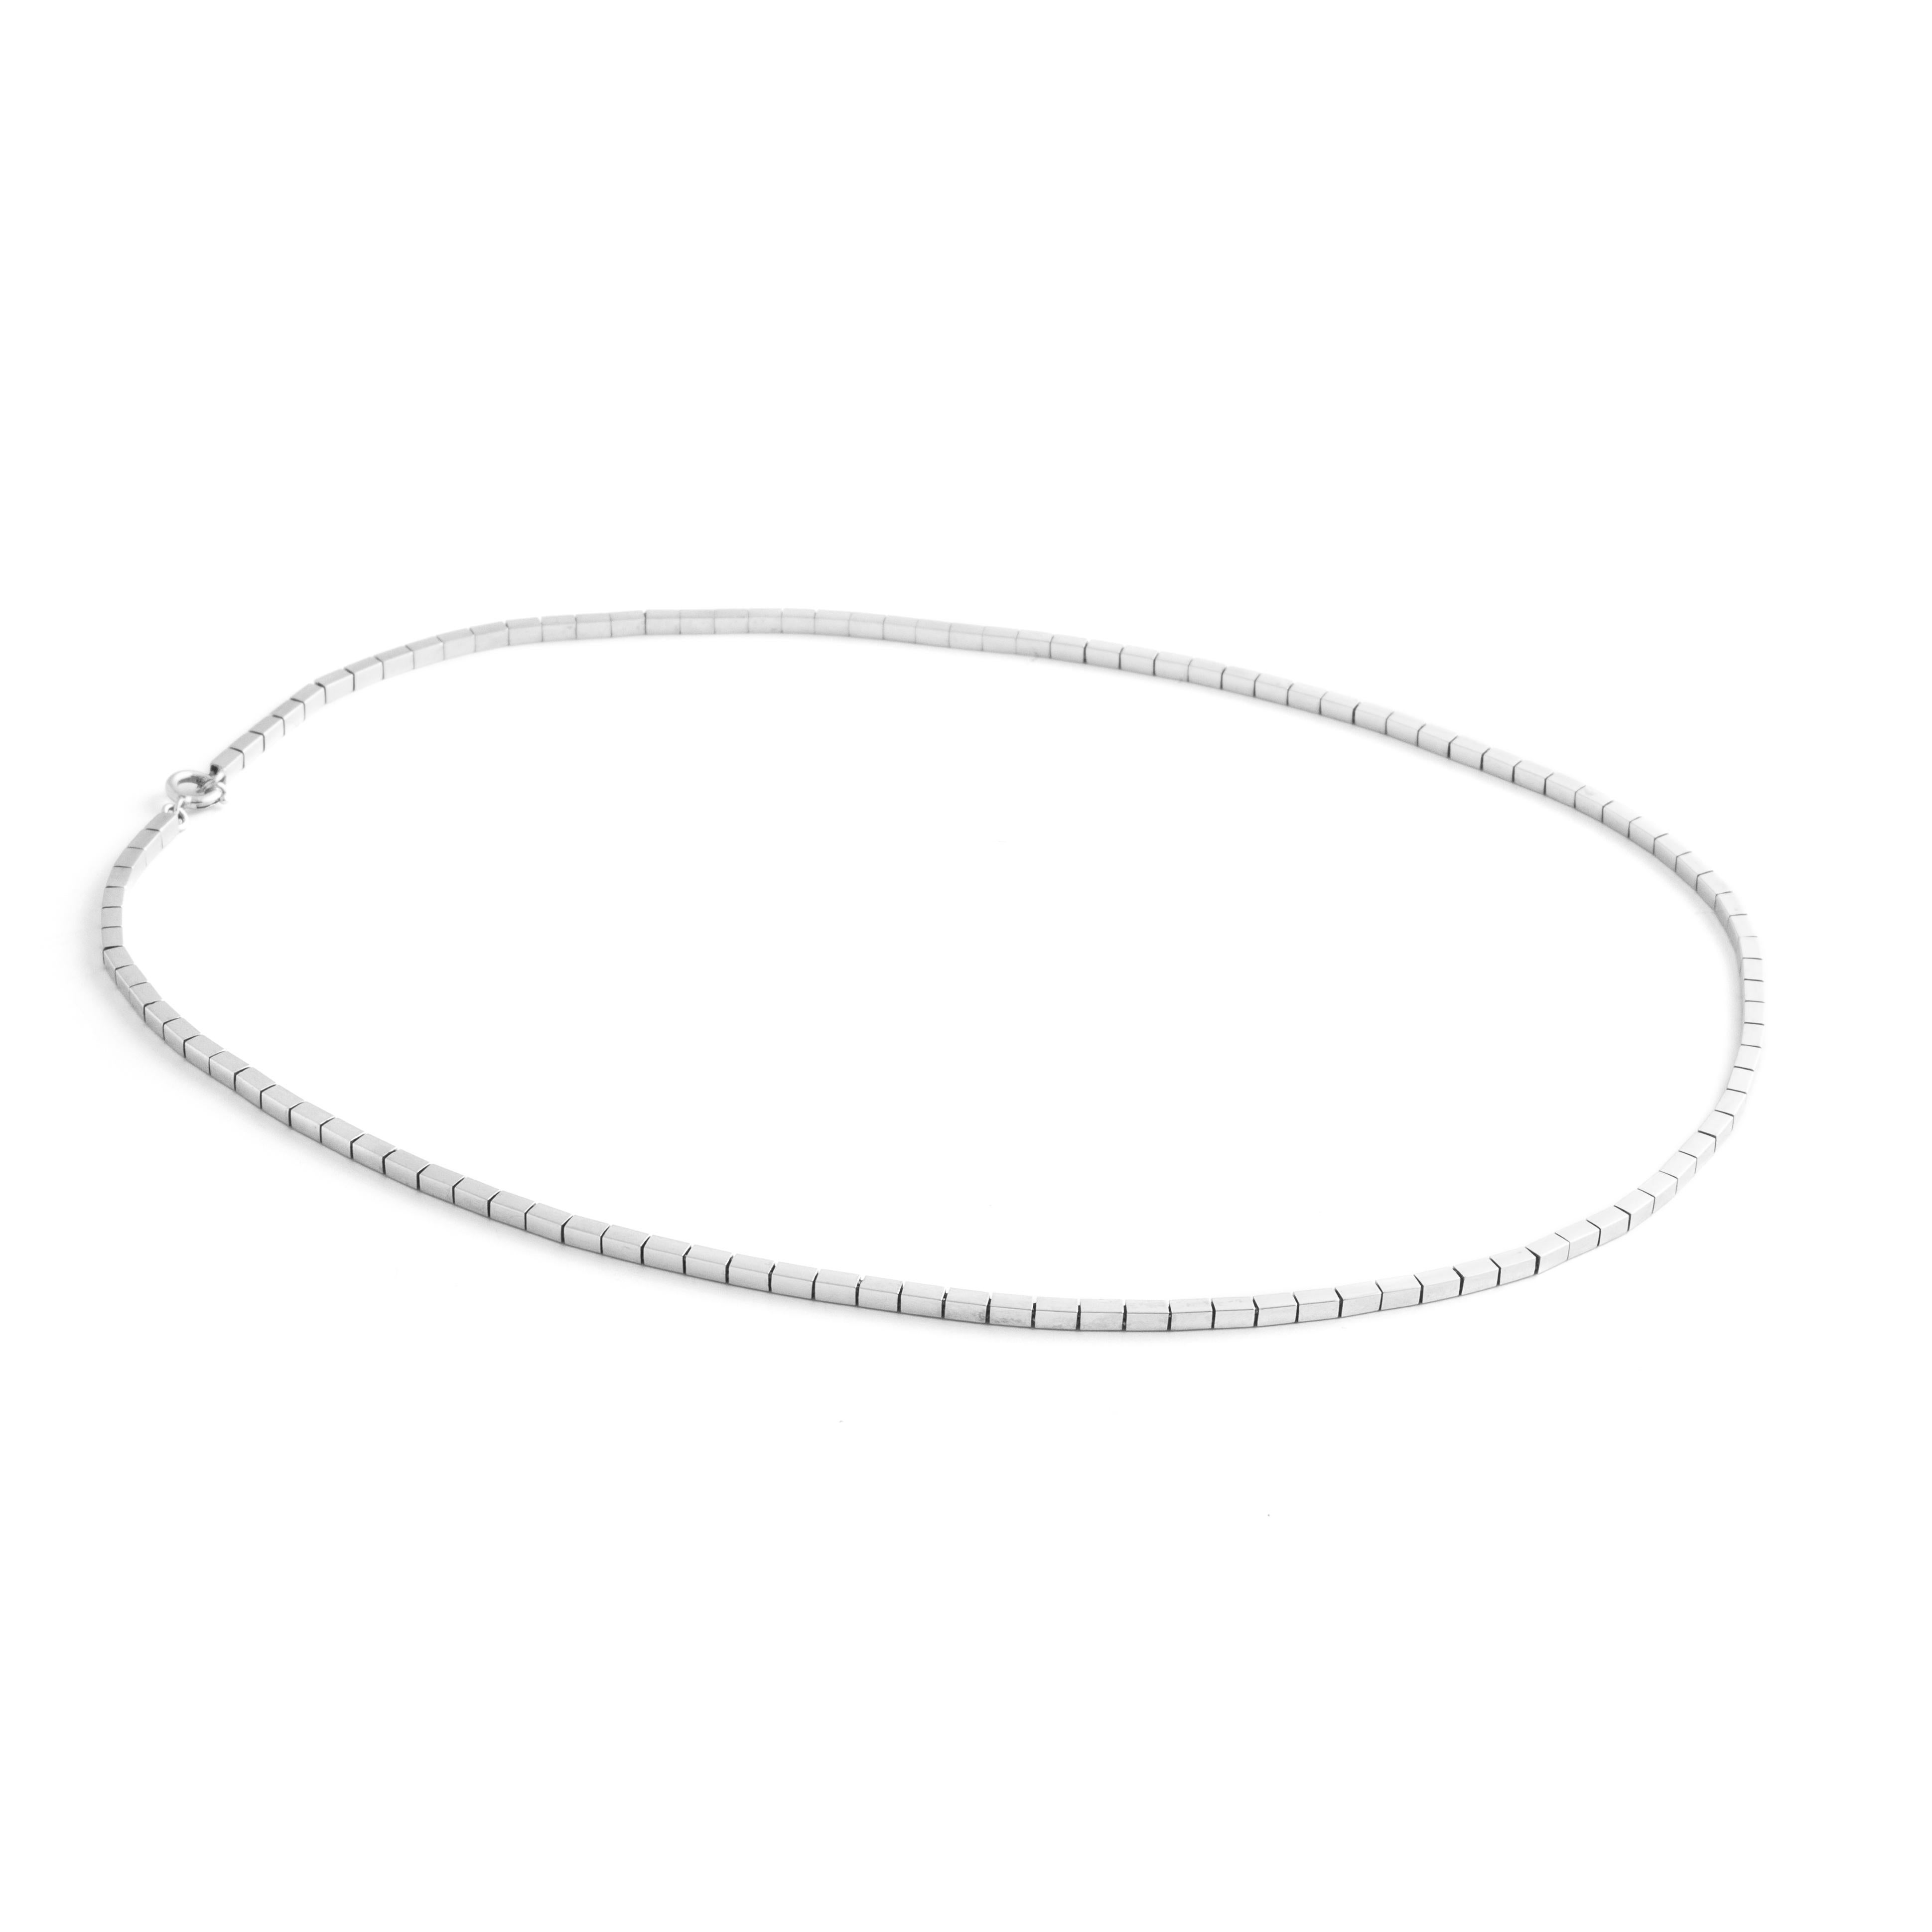 Art Deco Retro White Gold Chain Necklace Early 20th Century For Sale